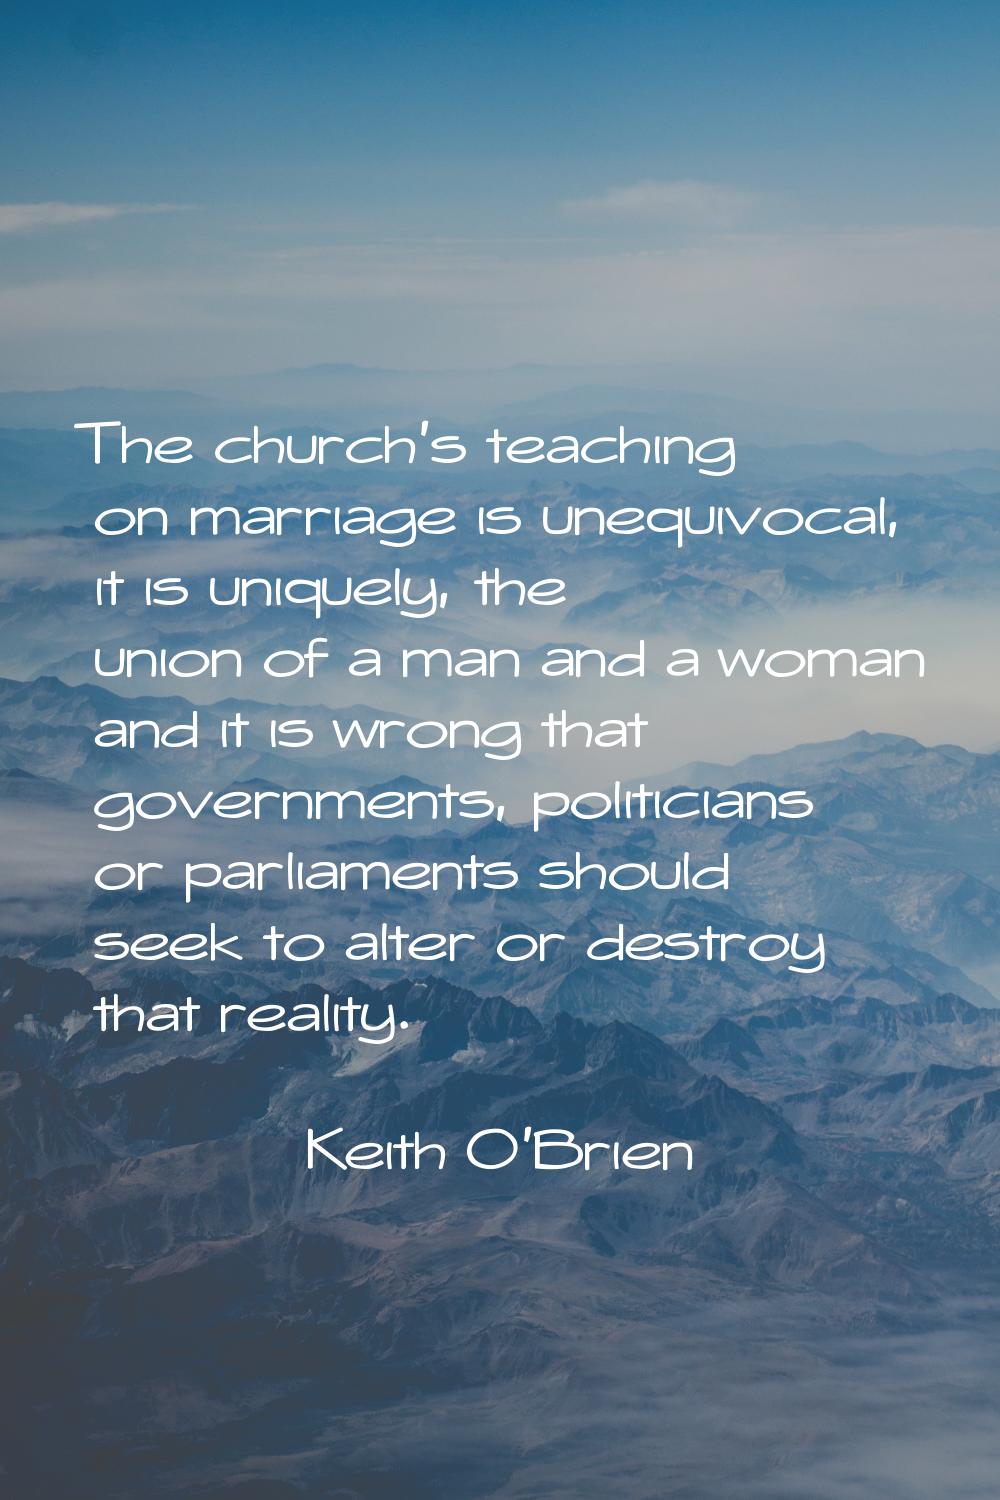 The church's teaching on marriage is unequivocal, it is uniquely, the union of a man and a woman an